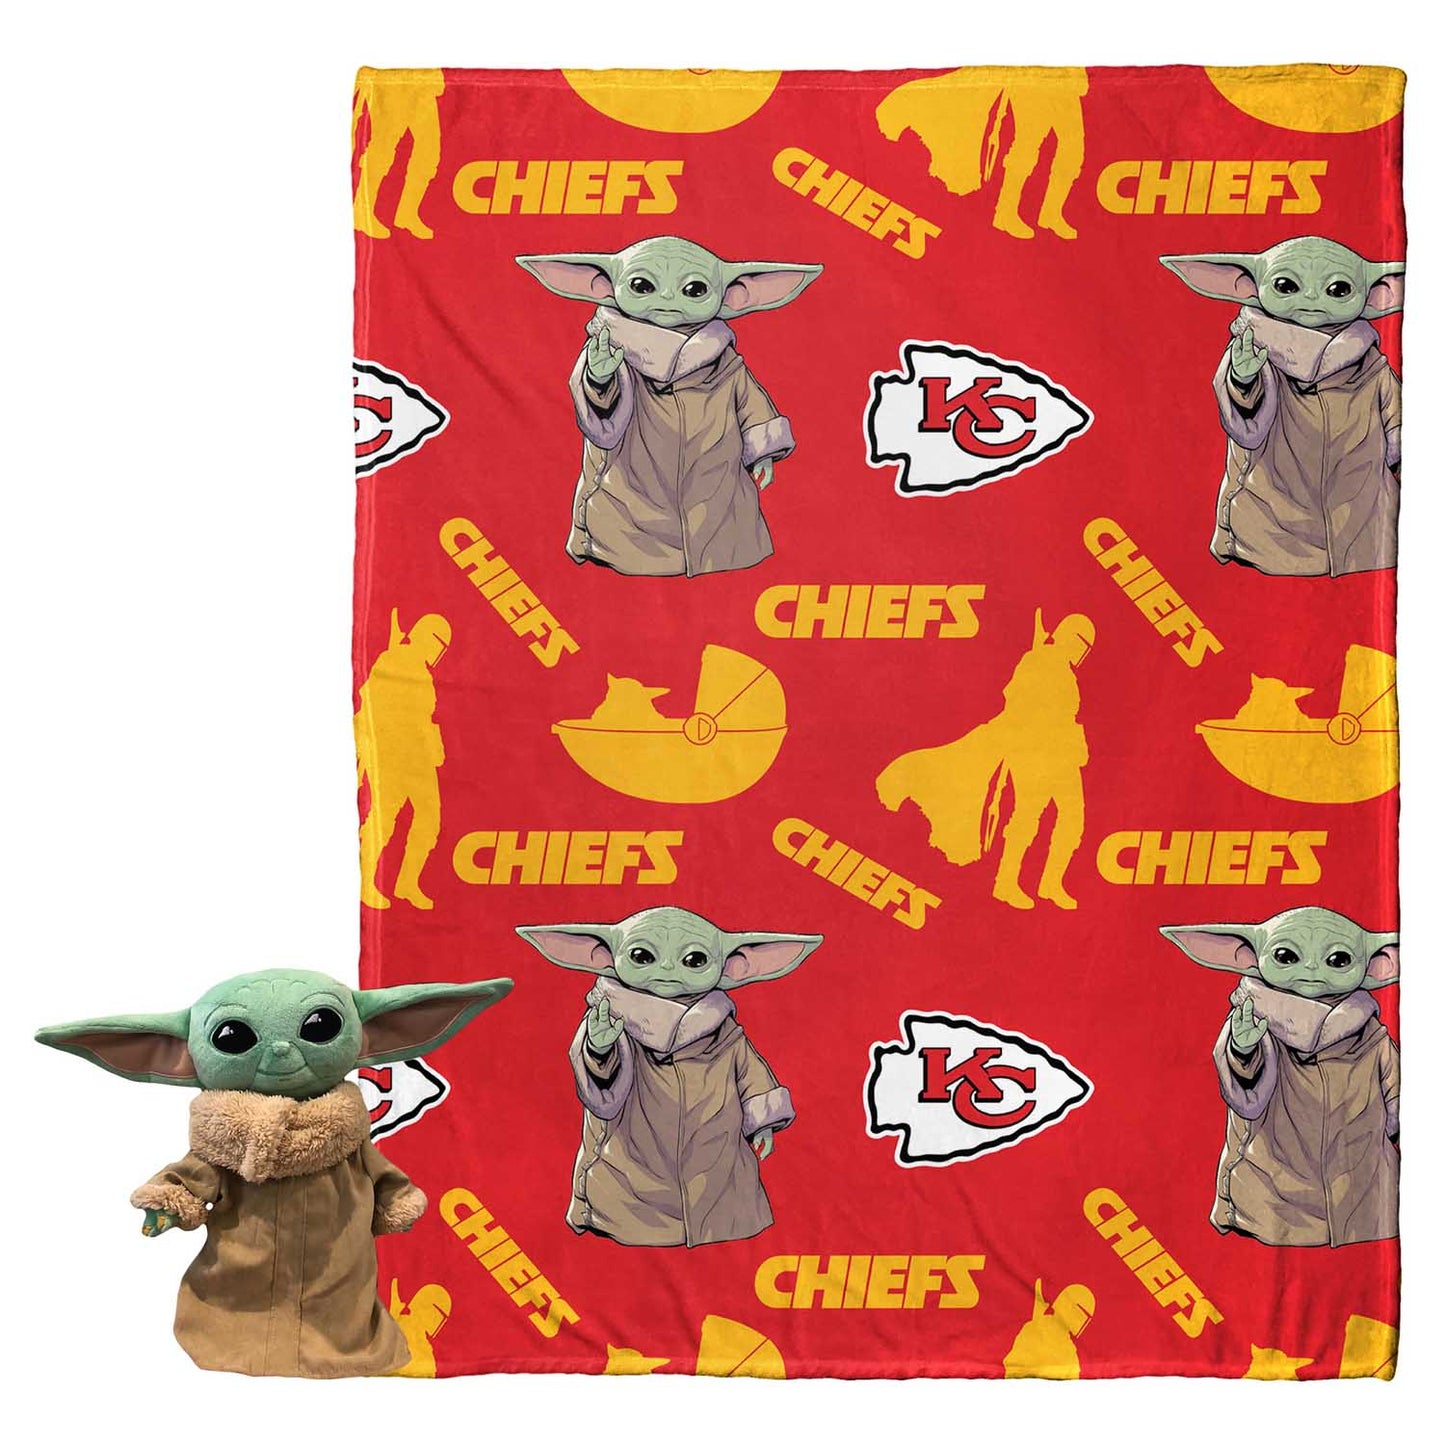 Kansas City Chiefs  NFL x Star Wars Pillow & Blanket Set 40" x 50" featuring The Child - Red